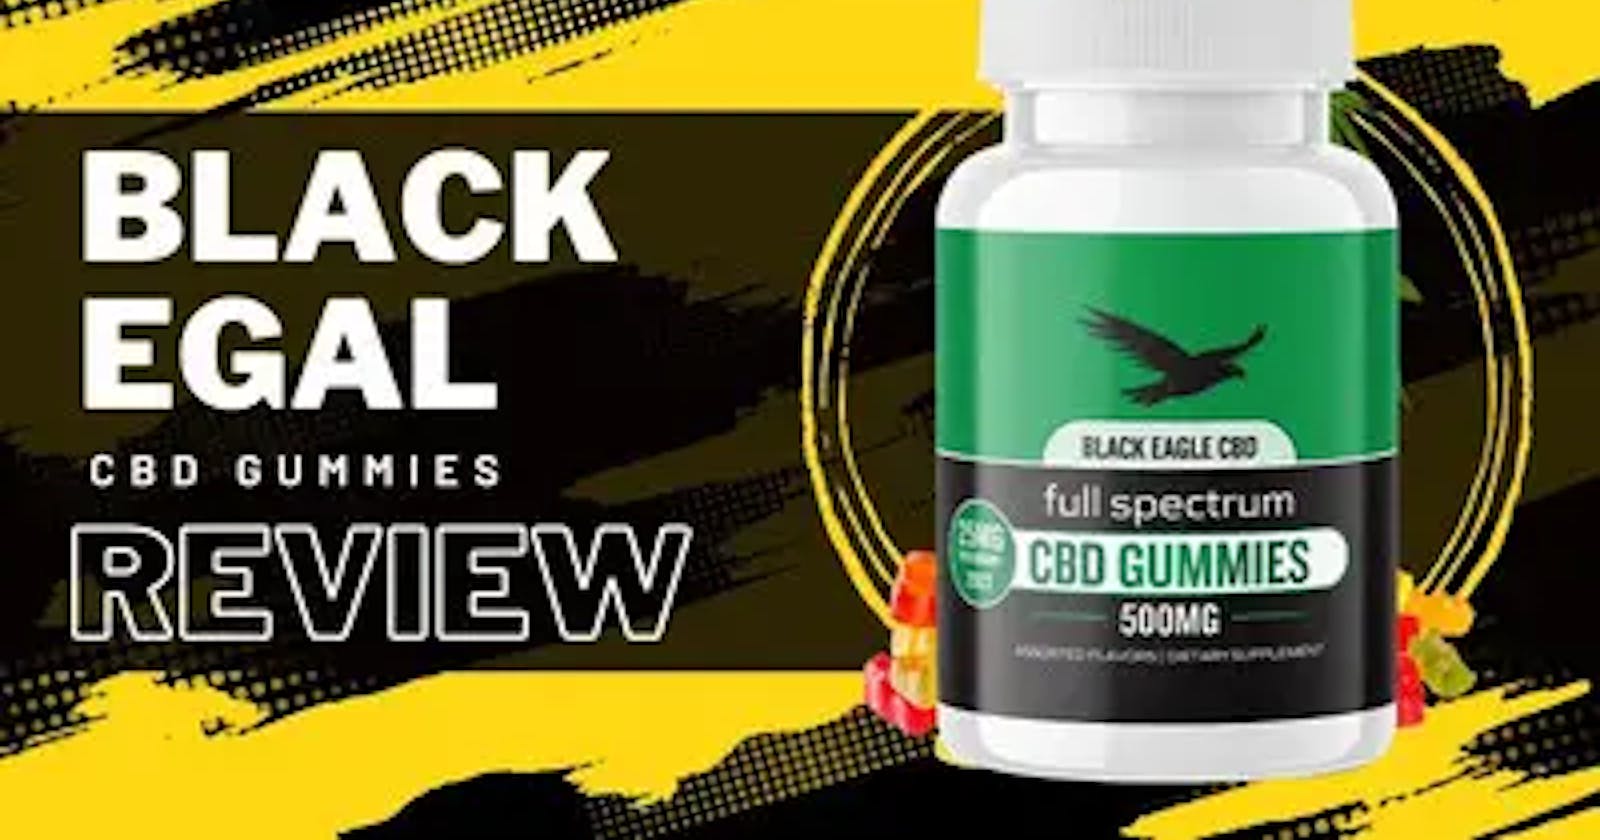 Black Eagle CBD Supplement Updates 2022 - Benefits and Purchase!